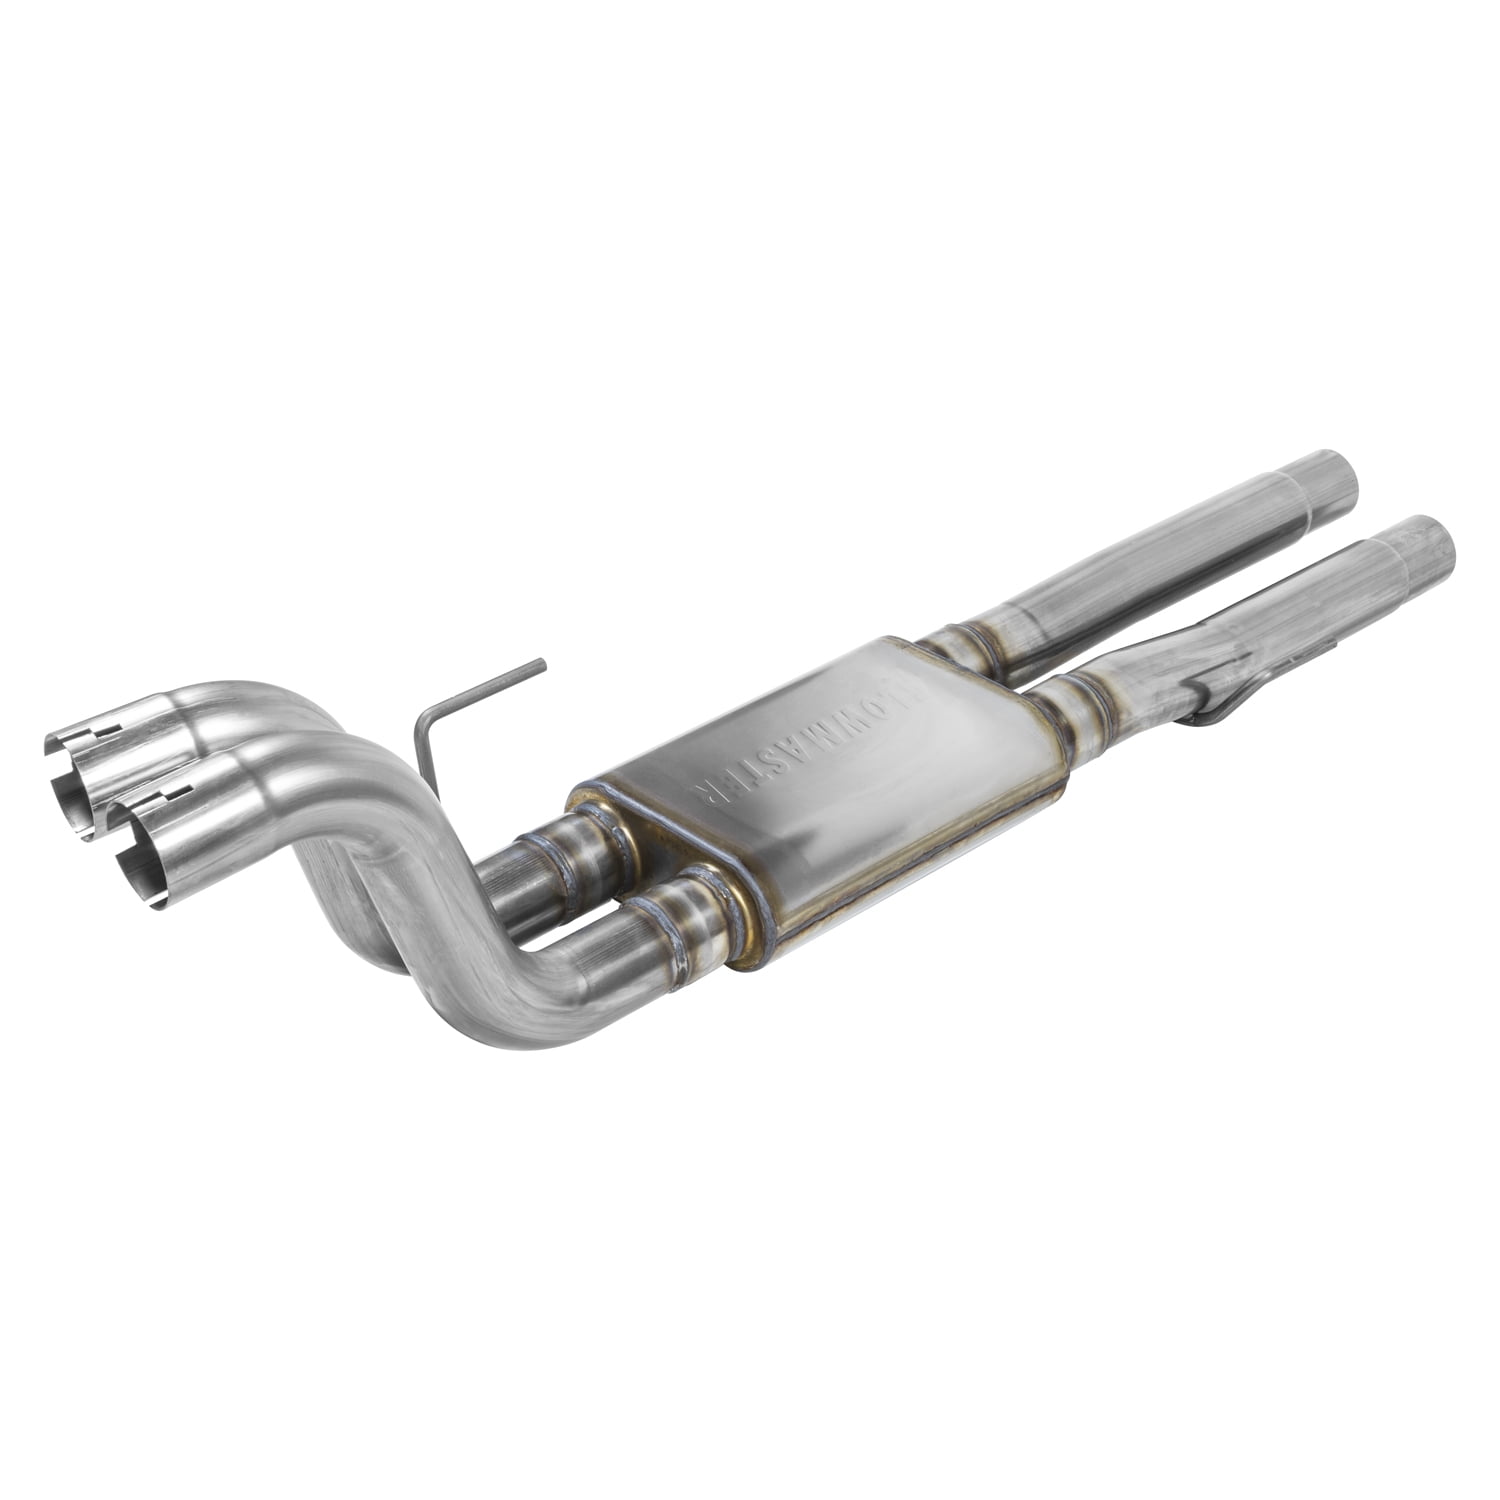 Flowmaster 717776 Exhaust Muffler FlowFX 13 Inch Body/ 56 Inch Overall Length; Stainless Steel 3 Inch Inlet Dual 3 Inch Outlet Muffler